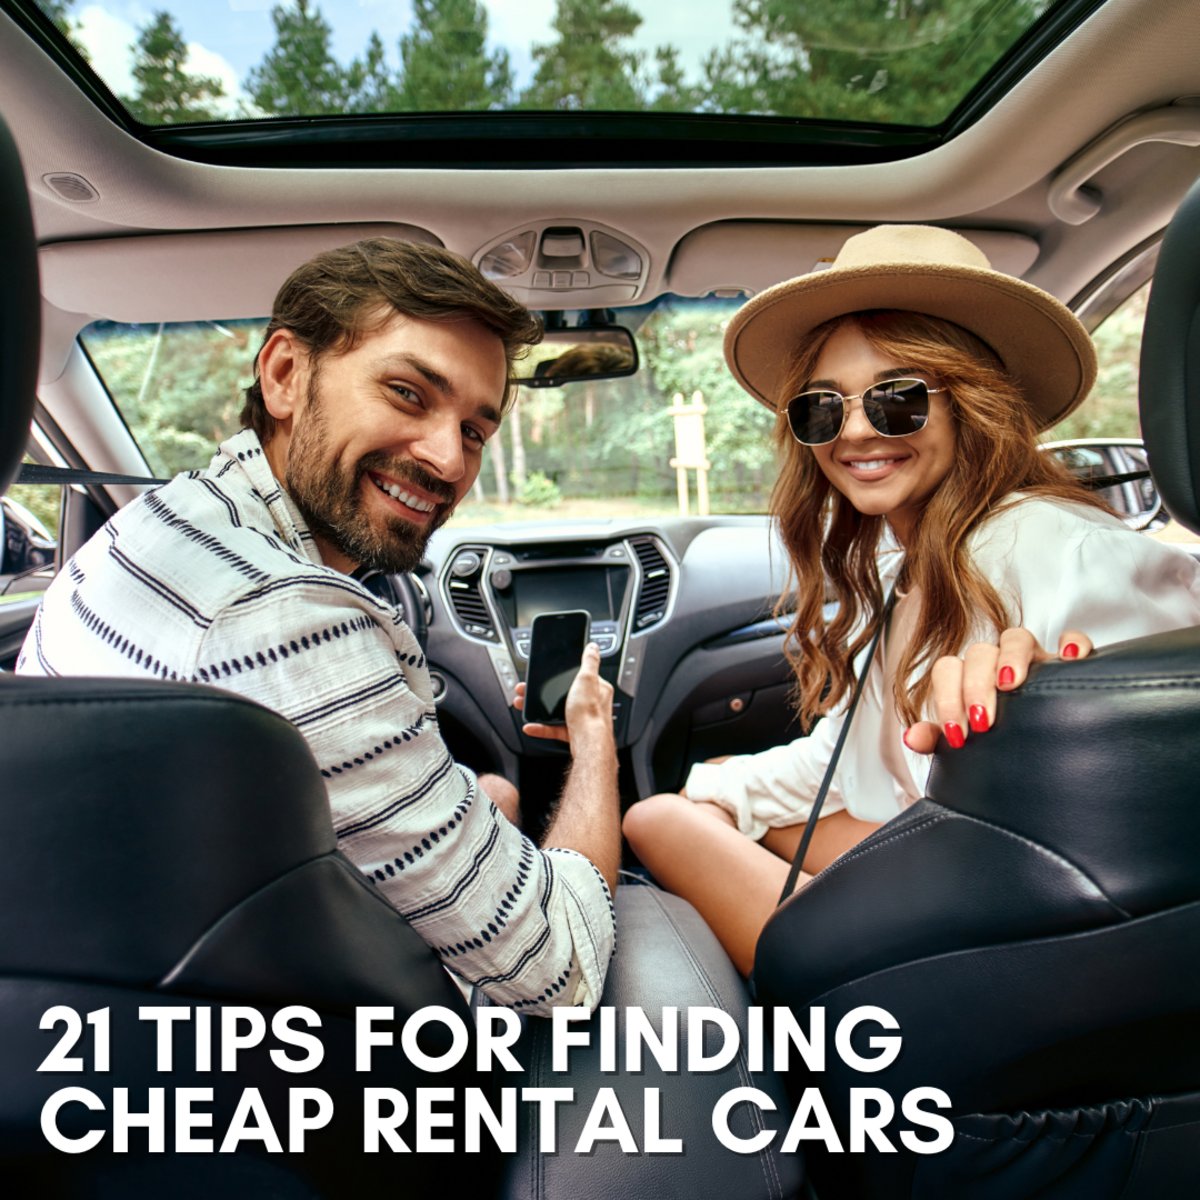 Planning on hitting the open road on your way to Mobile? 🚗 Read these 21 tips for scoring sweet deals on #rentalcars so that you can explore without breaking the bank. bit.ly/3uBCqBJ #roadtrip #savvytraveler